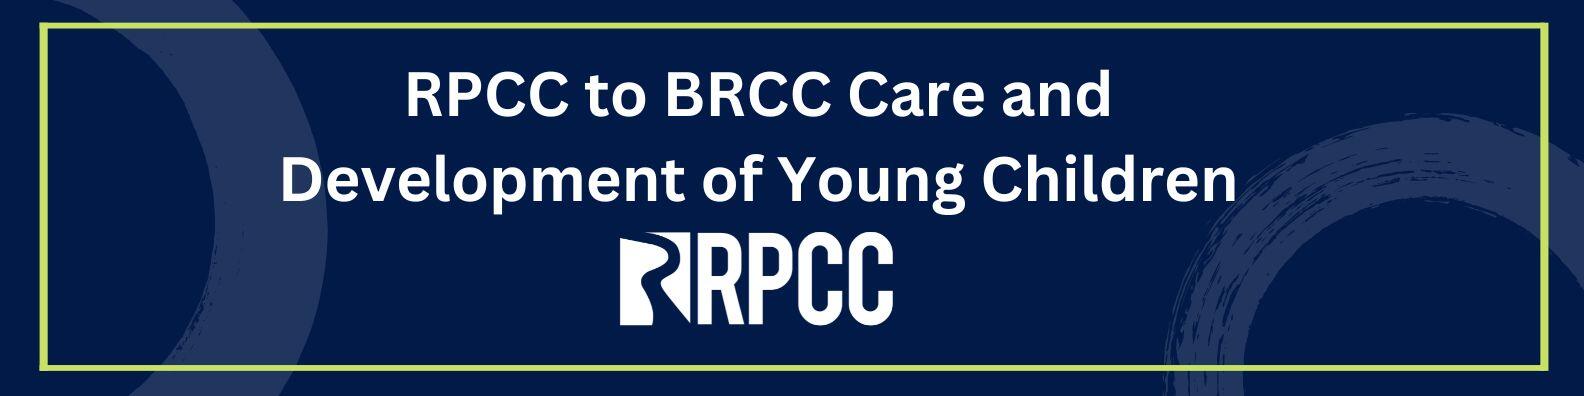 RPCC to BRCC Care and Development of Young Children